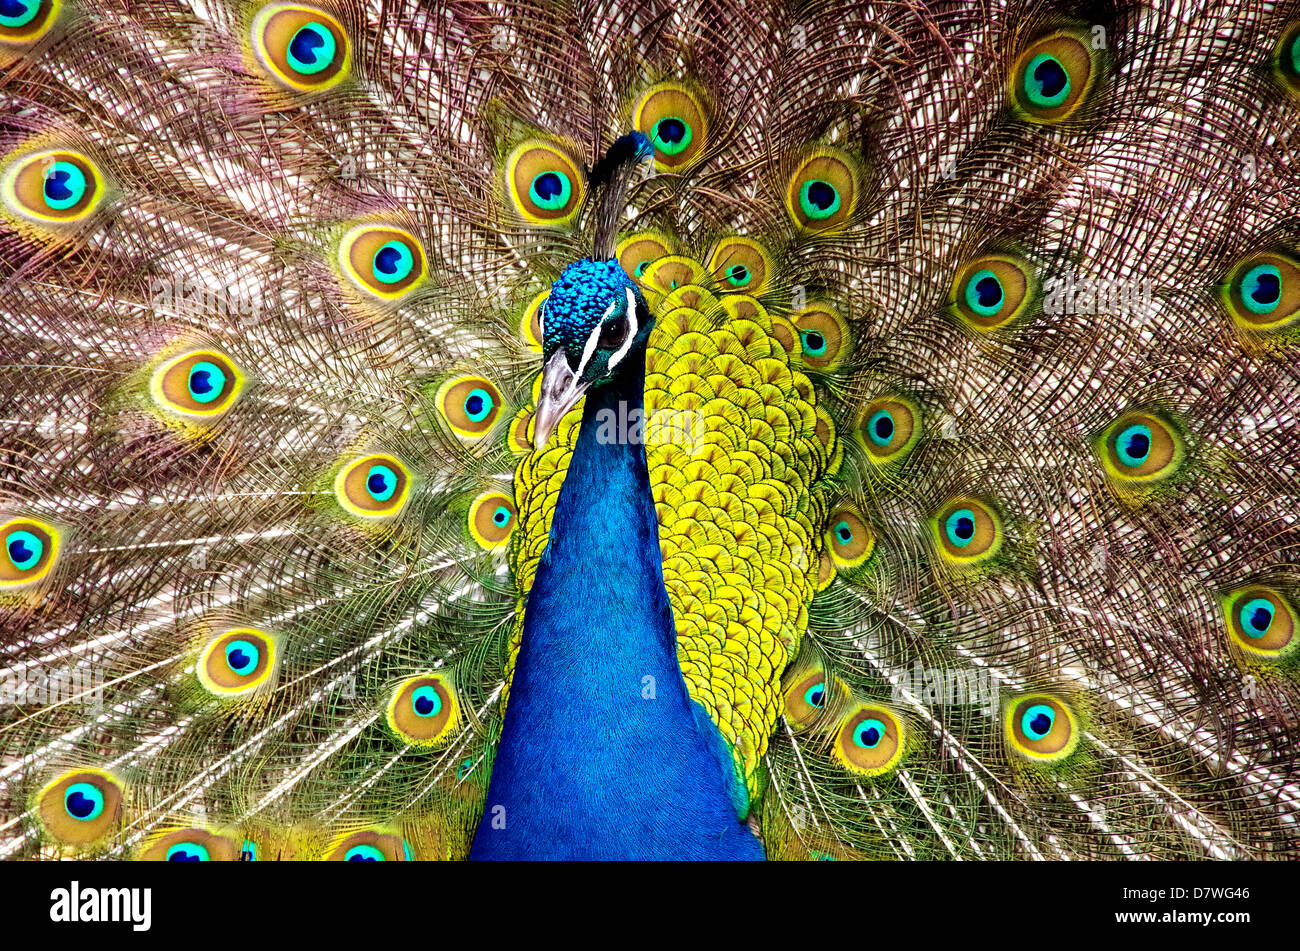 Tight composition of peacock with spread fantail feathers in bright light and bright colors, suitable for photo art, advertising Stock Photo